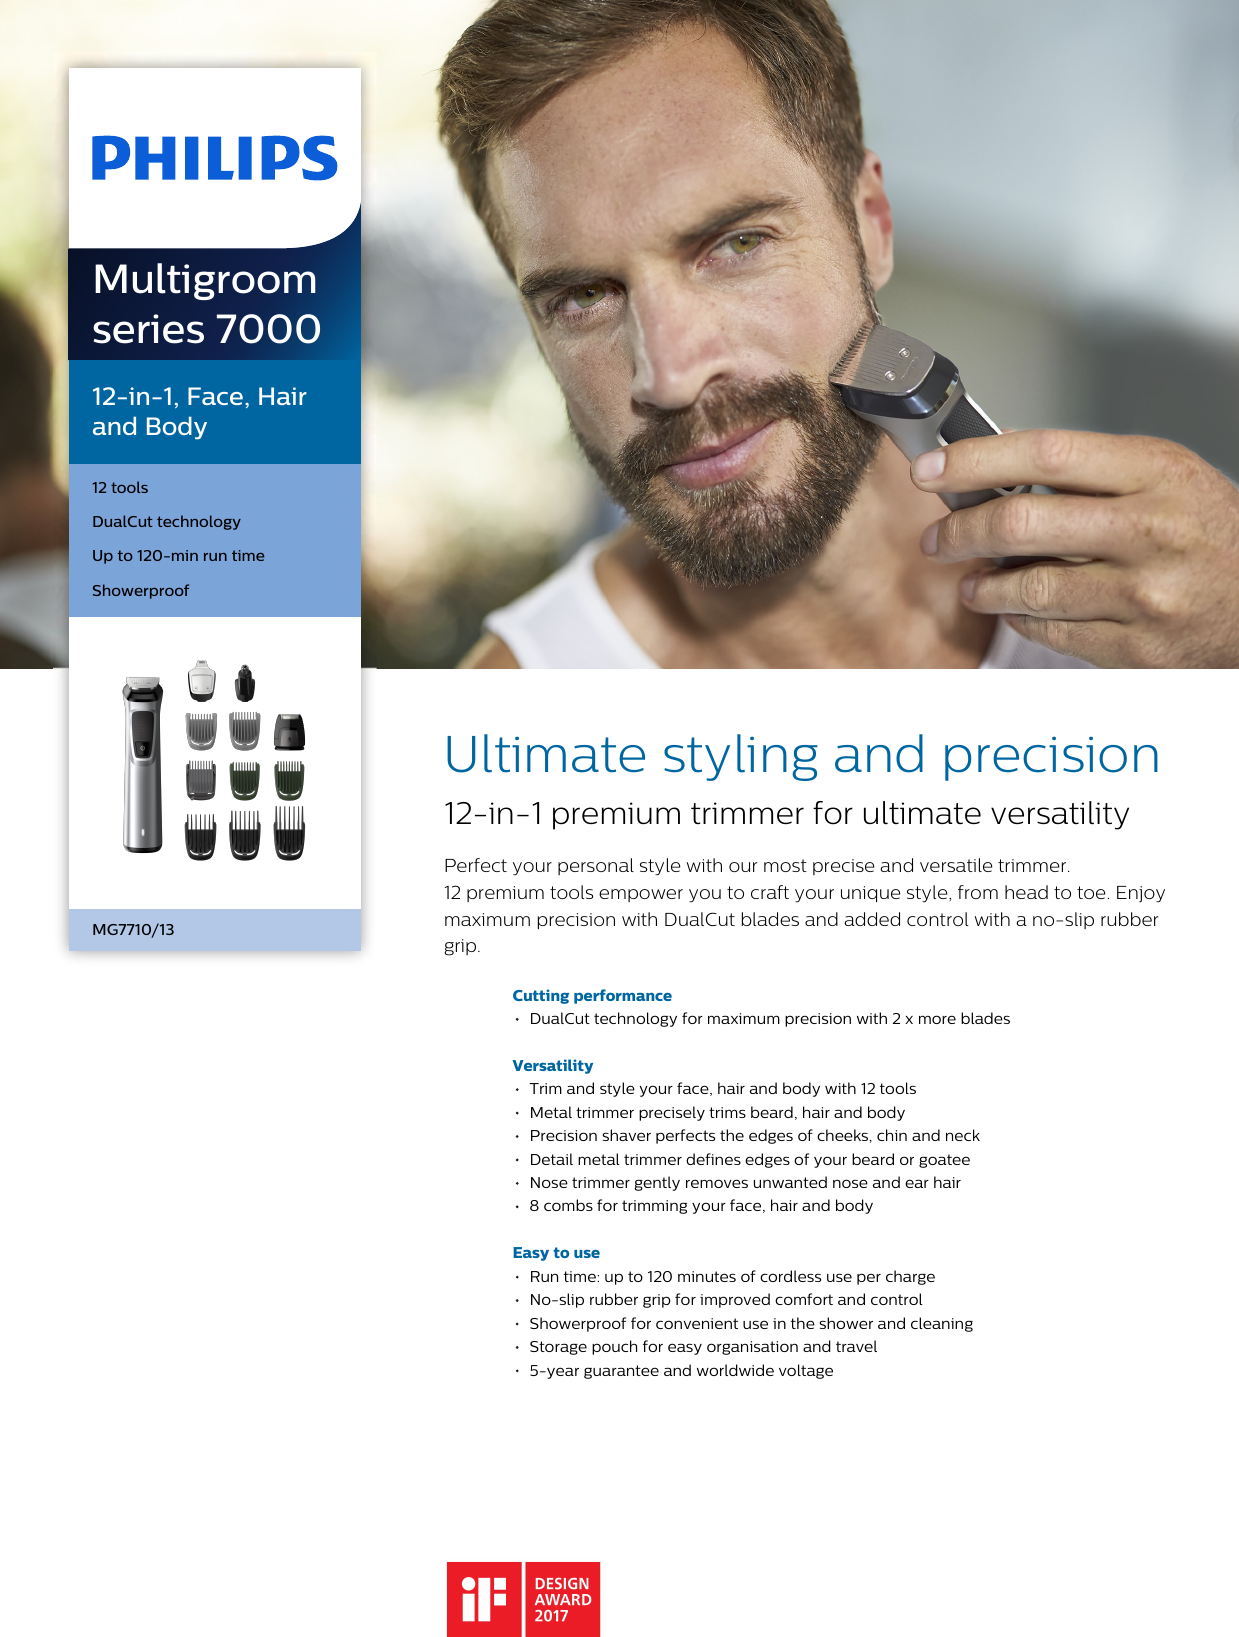 philips ultimate styling versatility